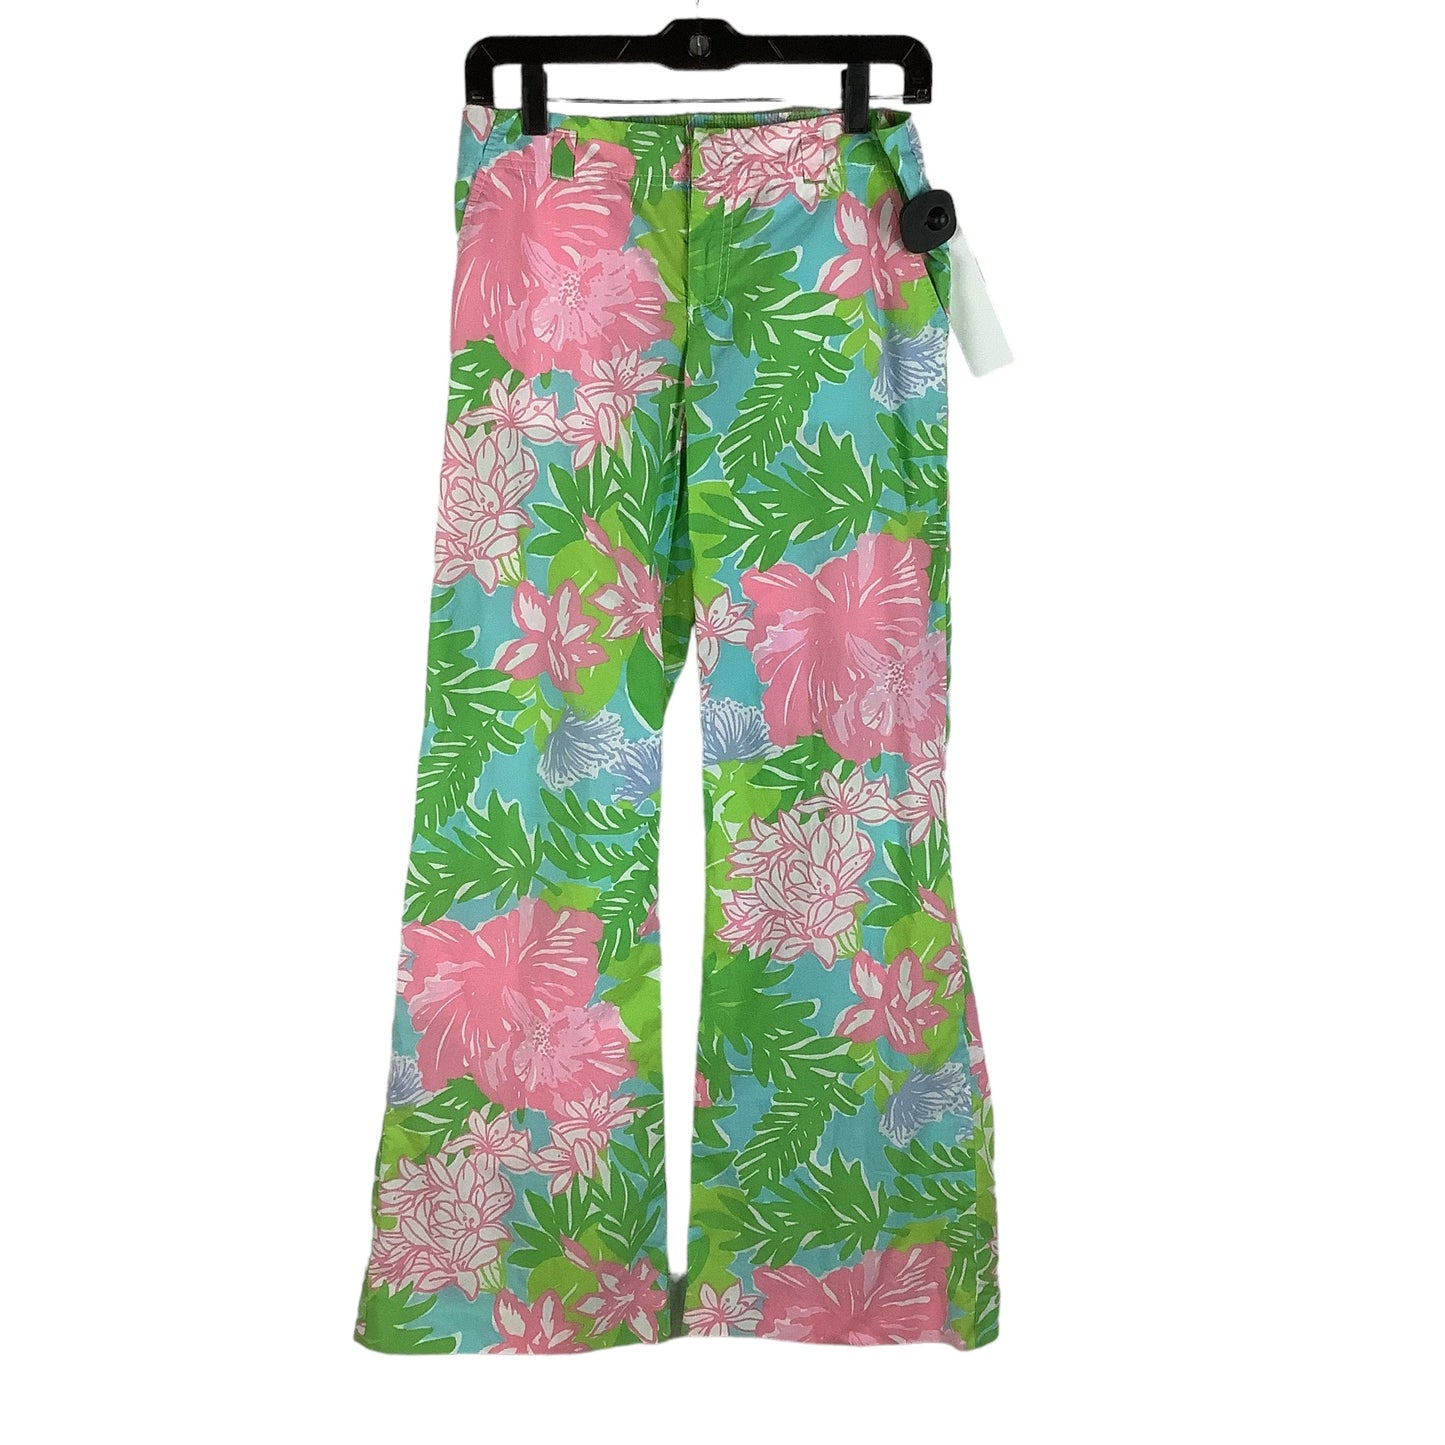 Green & Pink Pants Designer Lilly Pulitzer, Size 2